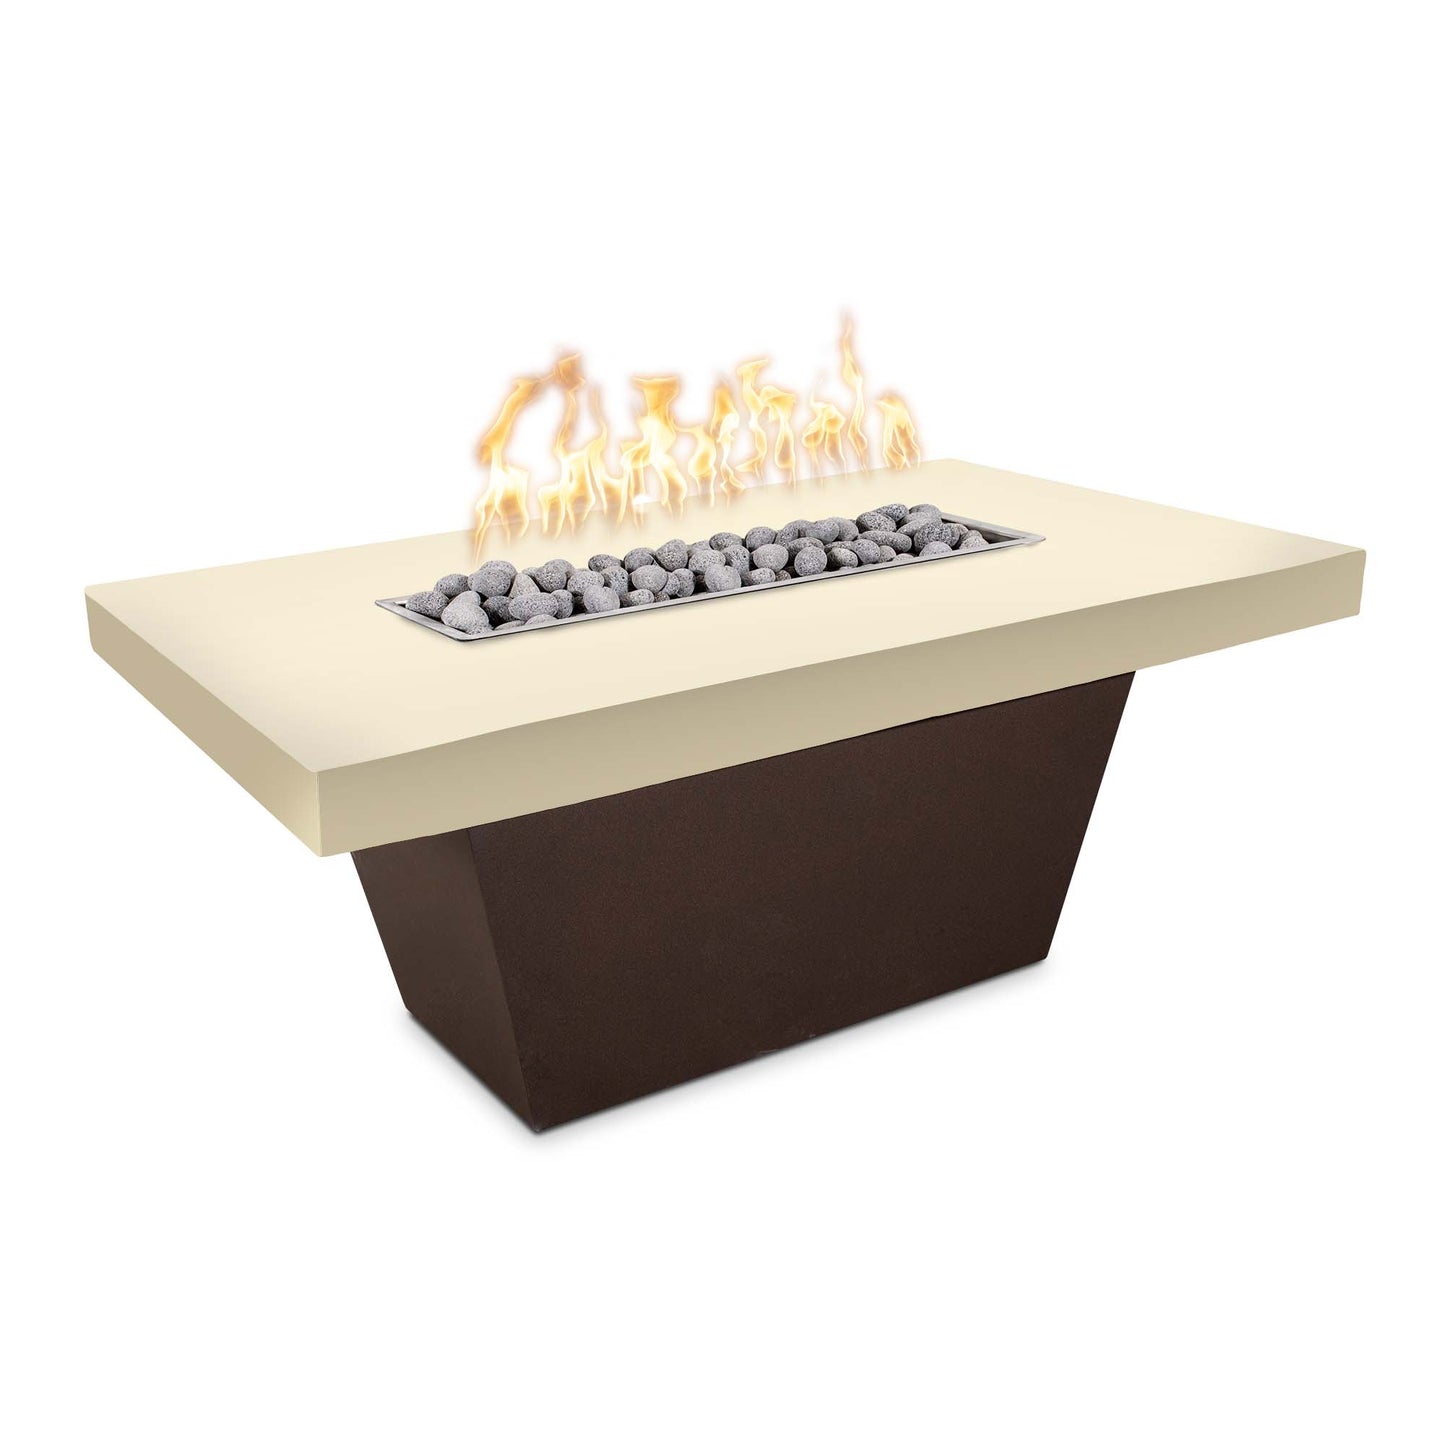 The Outdoor Plus Tacoma 48" Natural Gray Concrete Top & Java Powder Coated Base Natural Gas Fire Table with Match Lit Ignition